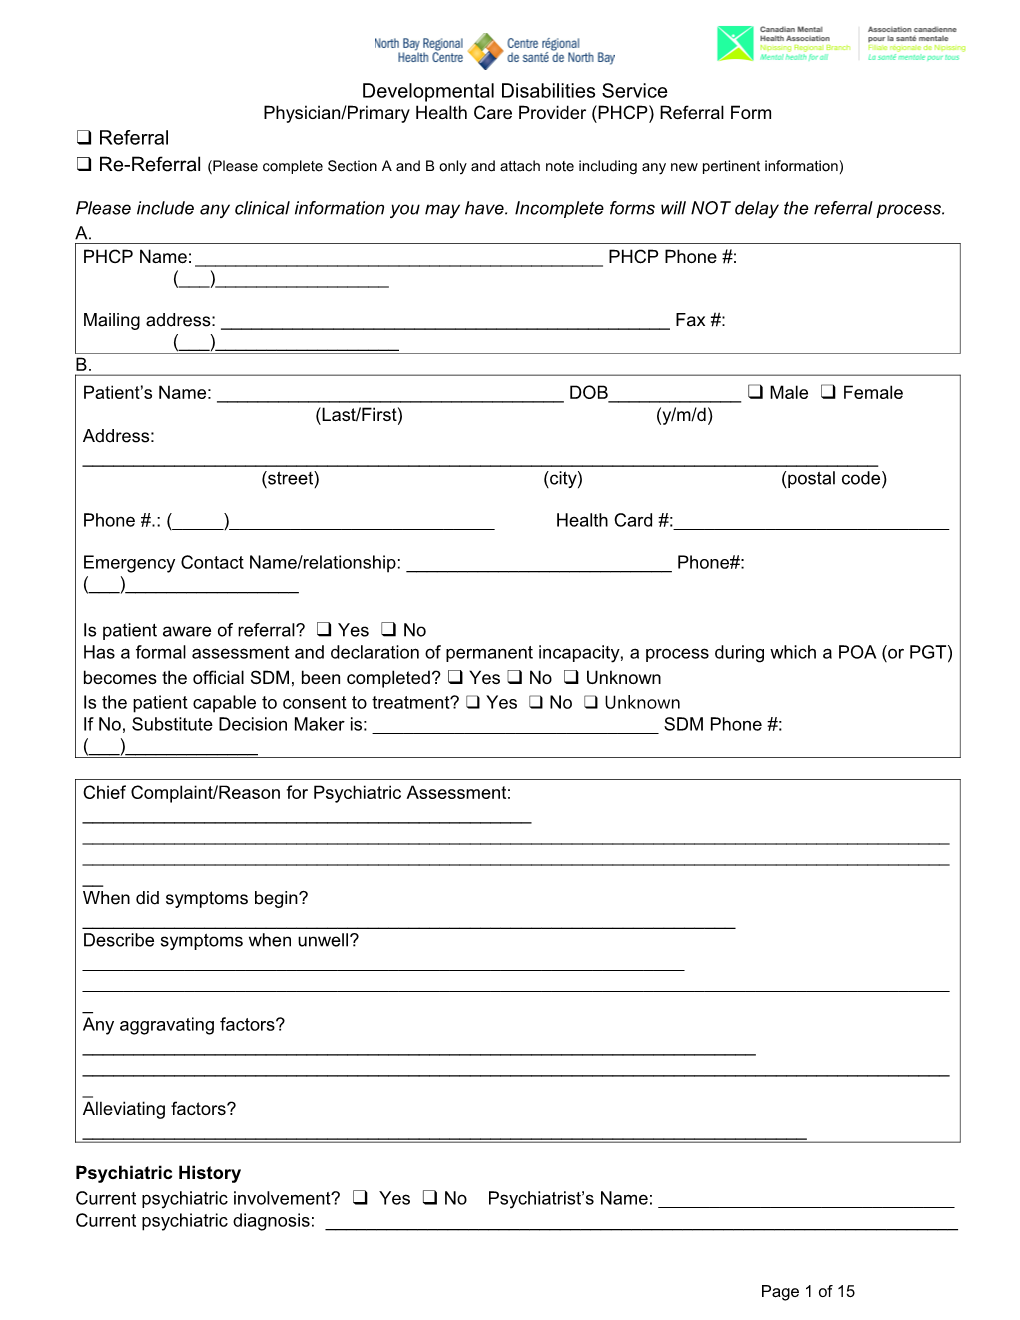 Physician/Primary Health Care Provider (PHCP) Referral Form